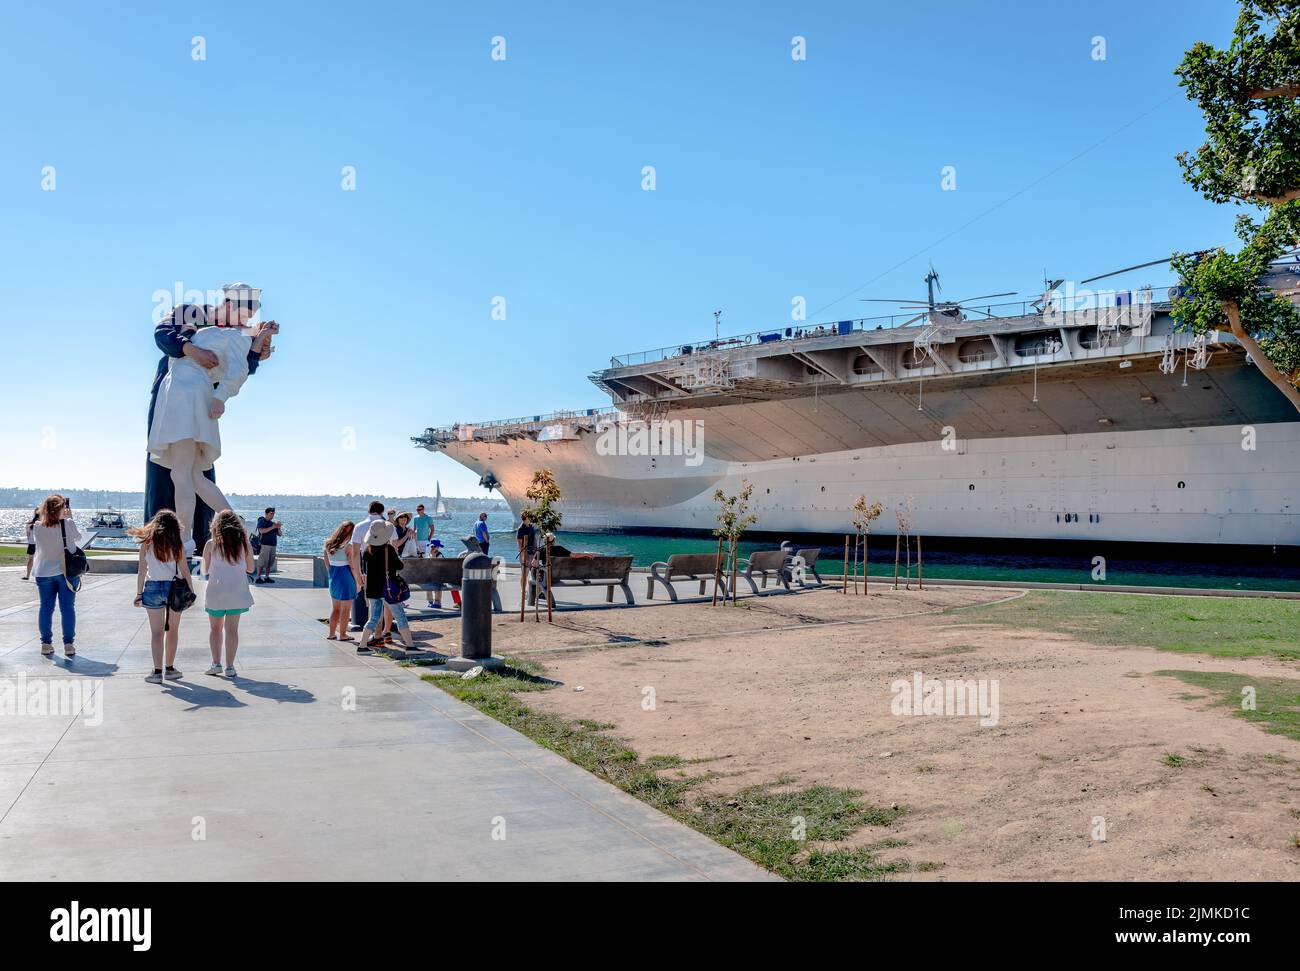 San Diego, Ca, USA - July 25 2015: View of the Tuna Harbor Park, with  The Kissing Taylor aka Unconditionally Surrender statue and the UUS Midway Muse Stock Photo